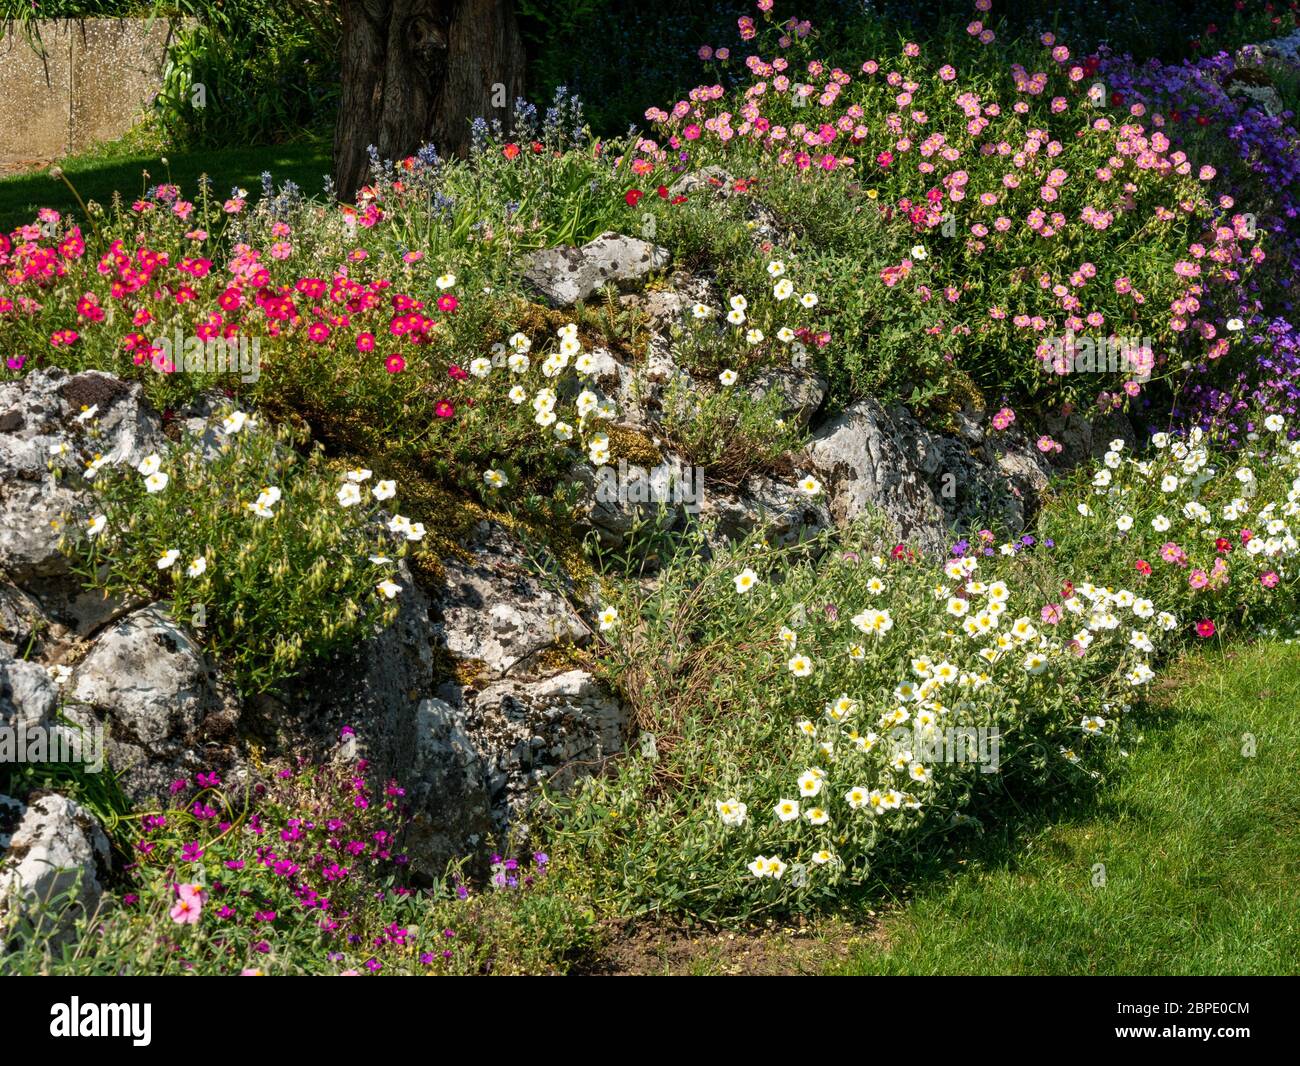 Attractive garden rockery covered in white and pink flowering rock rose (Cistus) plants in Spring, England, UK Stock Photo